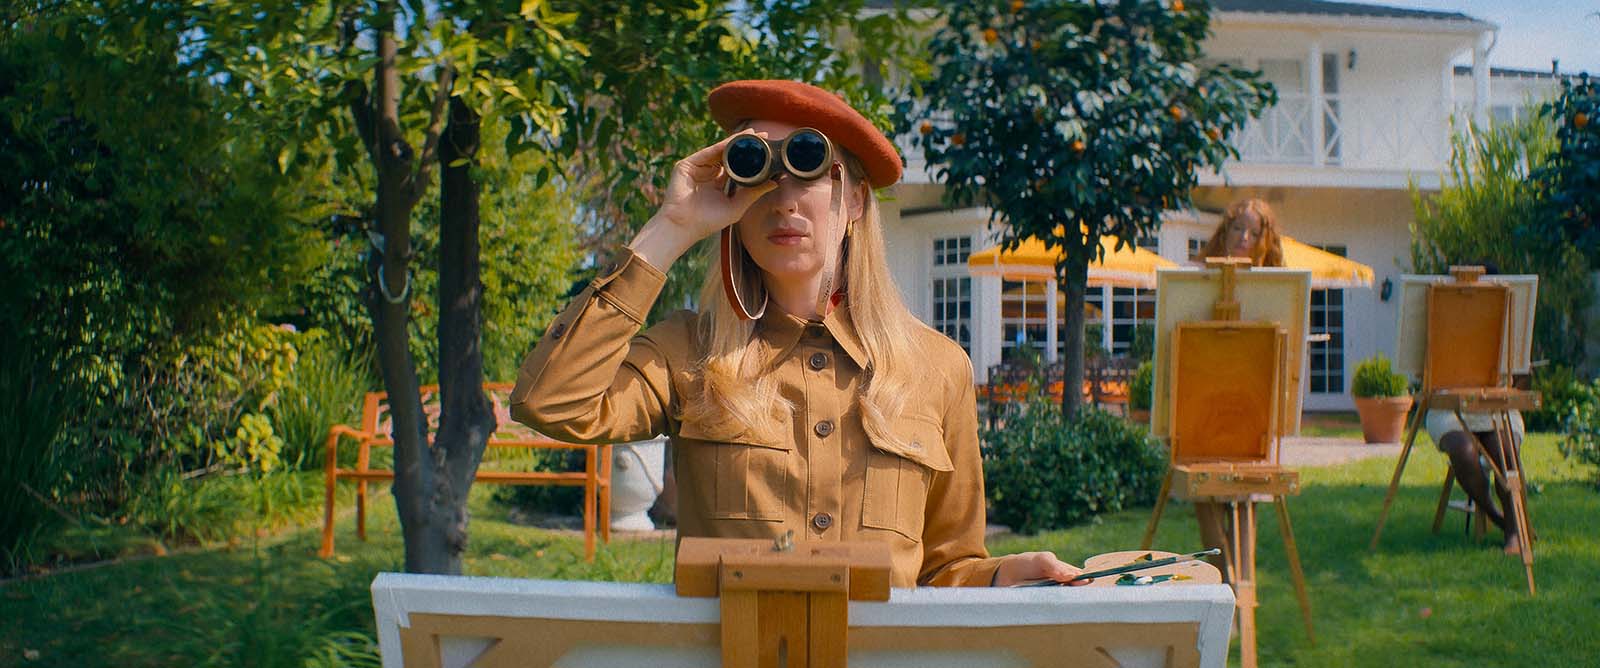 Anna Konkle takes center stage in the Wes Anderson-themed episode of The Afterparty. Image © Apple TV+